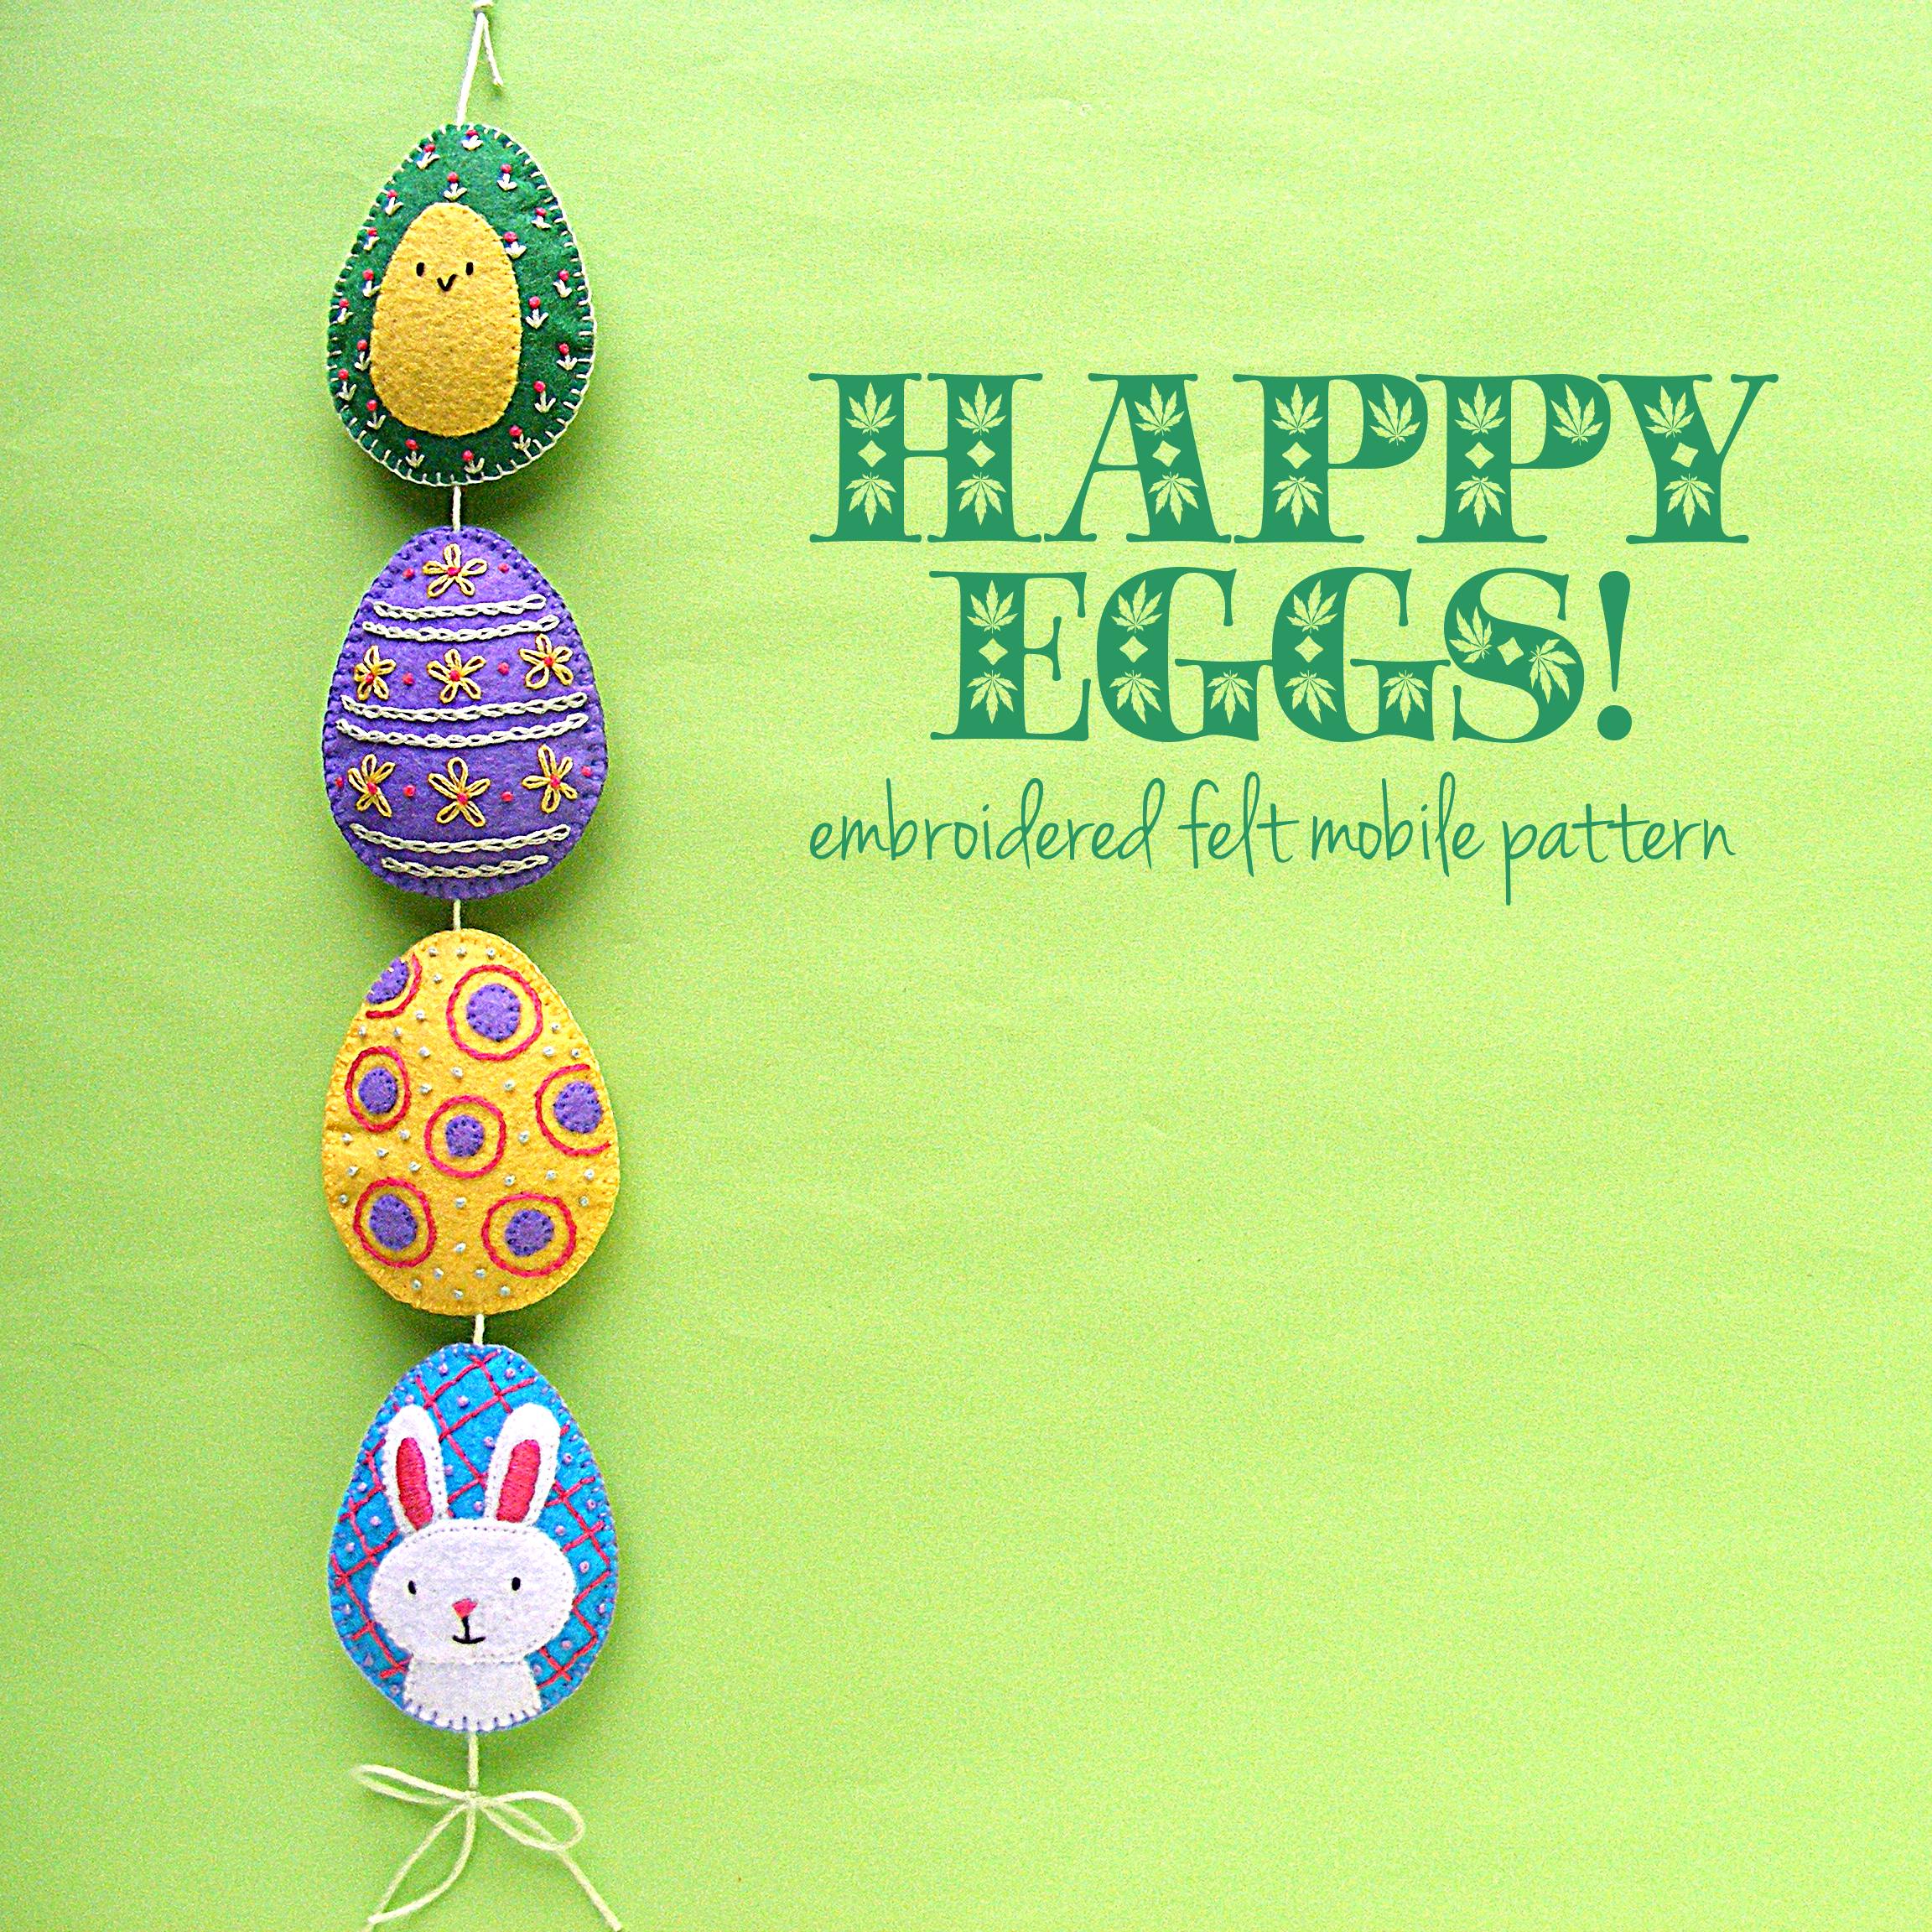 Happy Eggs! A Shiny Happy Easter Collection